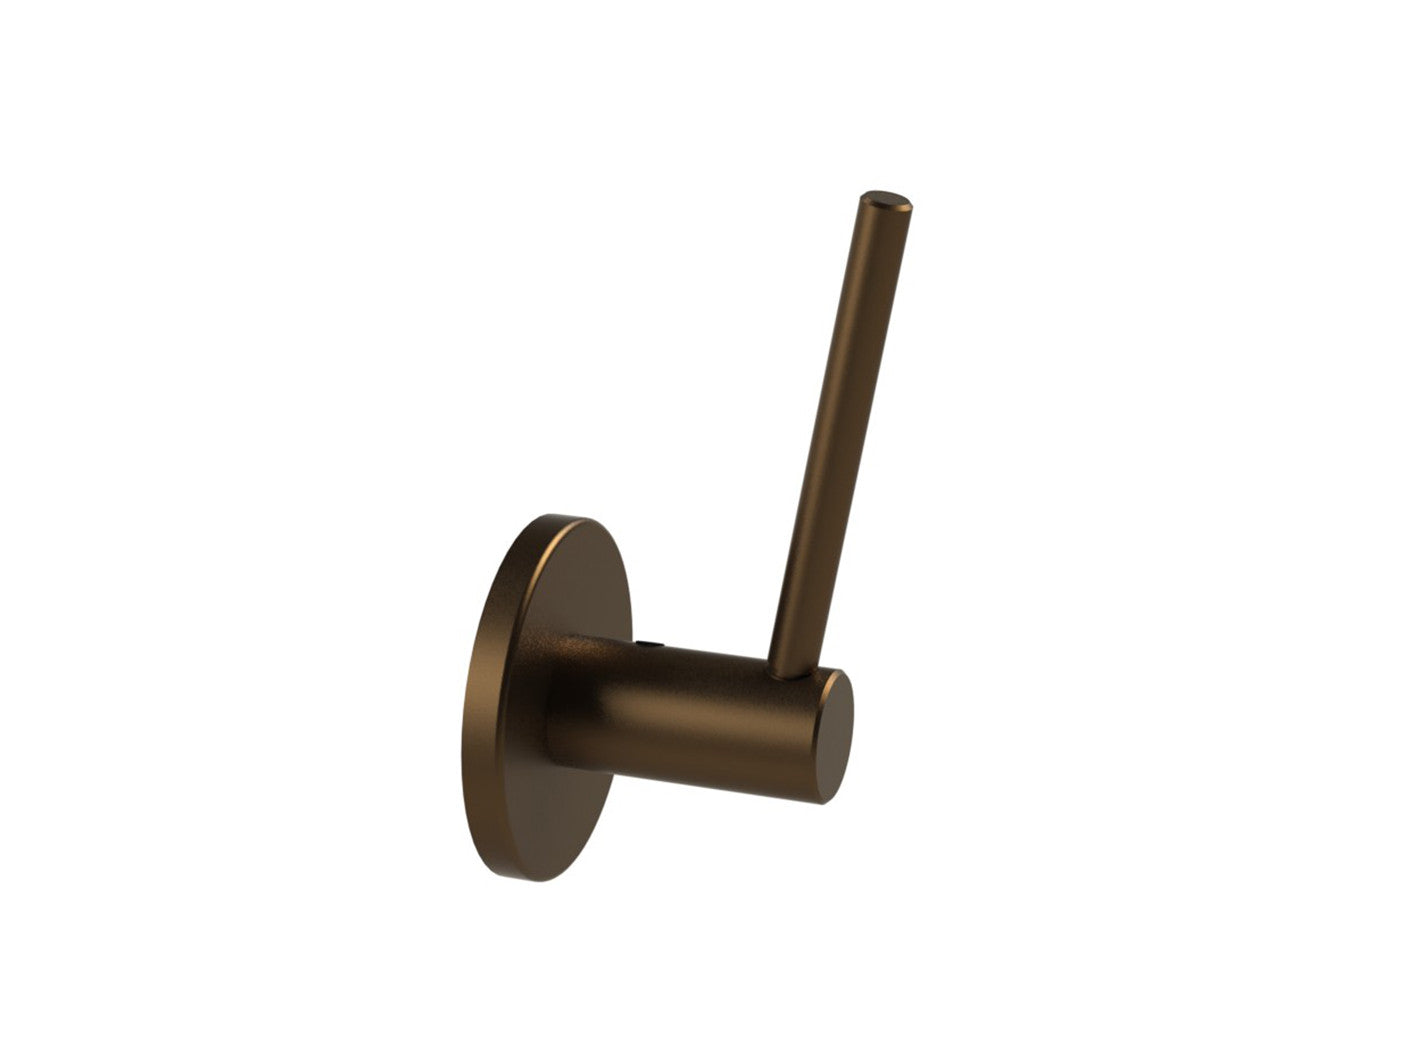 Universal support arm for Walcot House brackets - brushed bronze